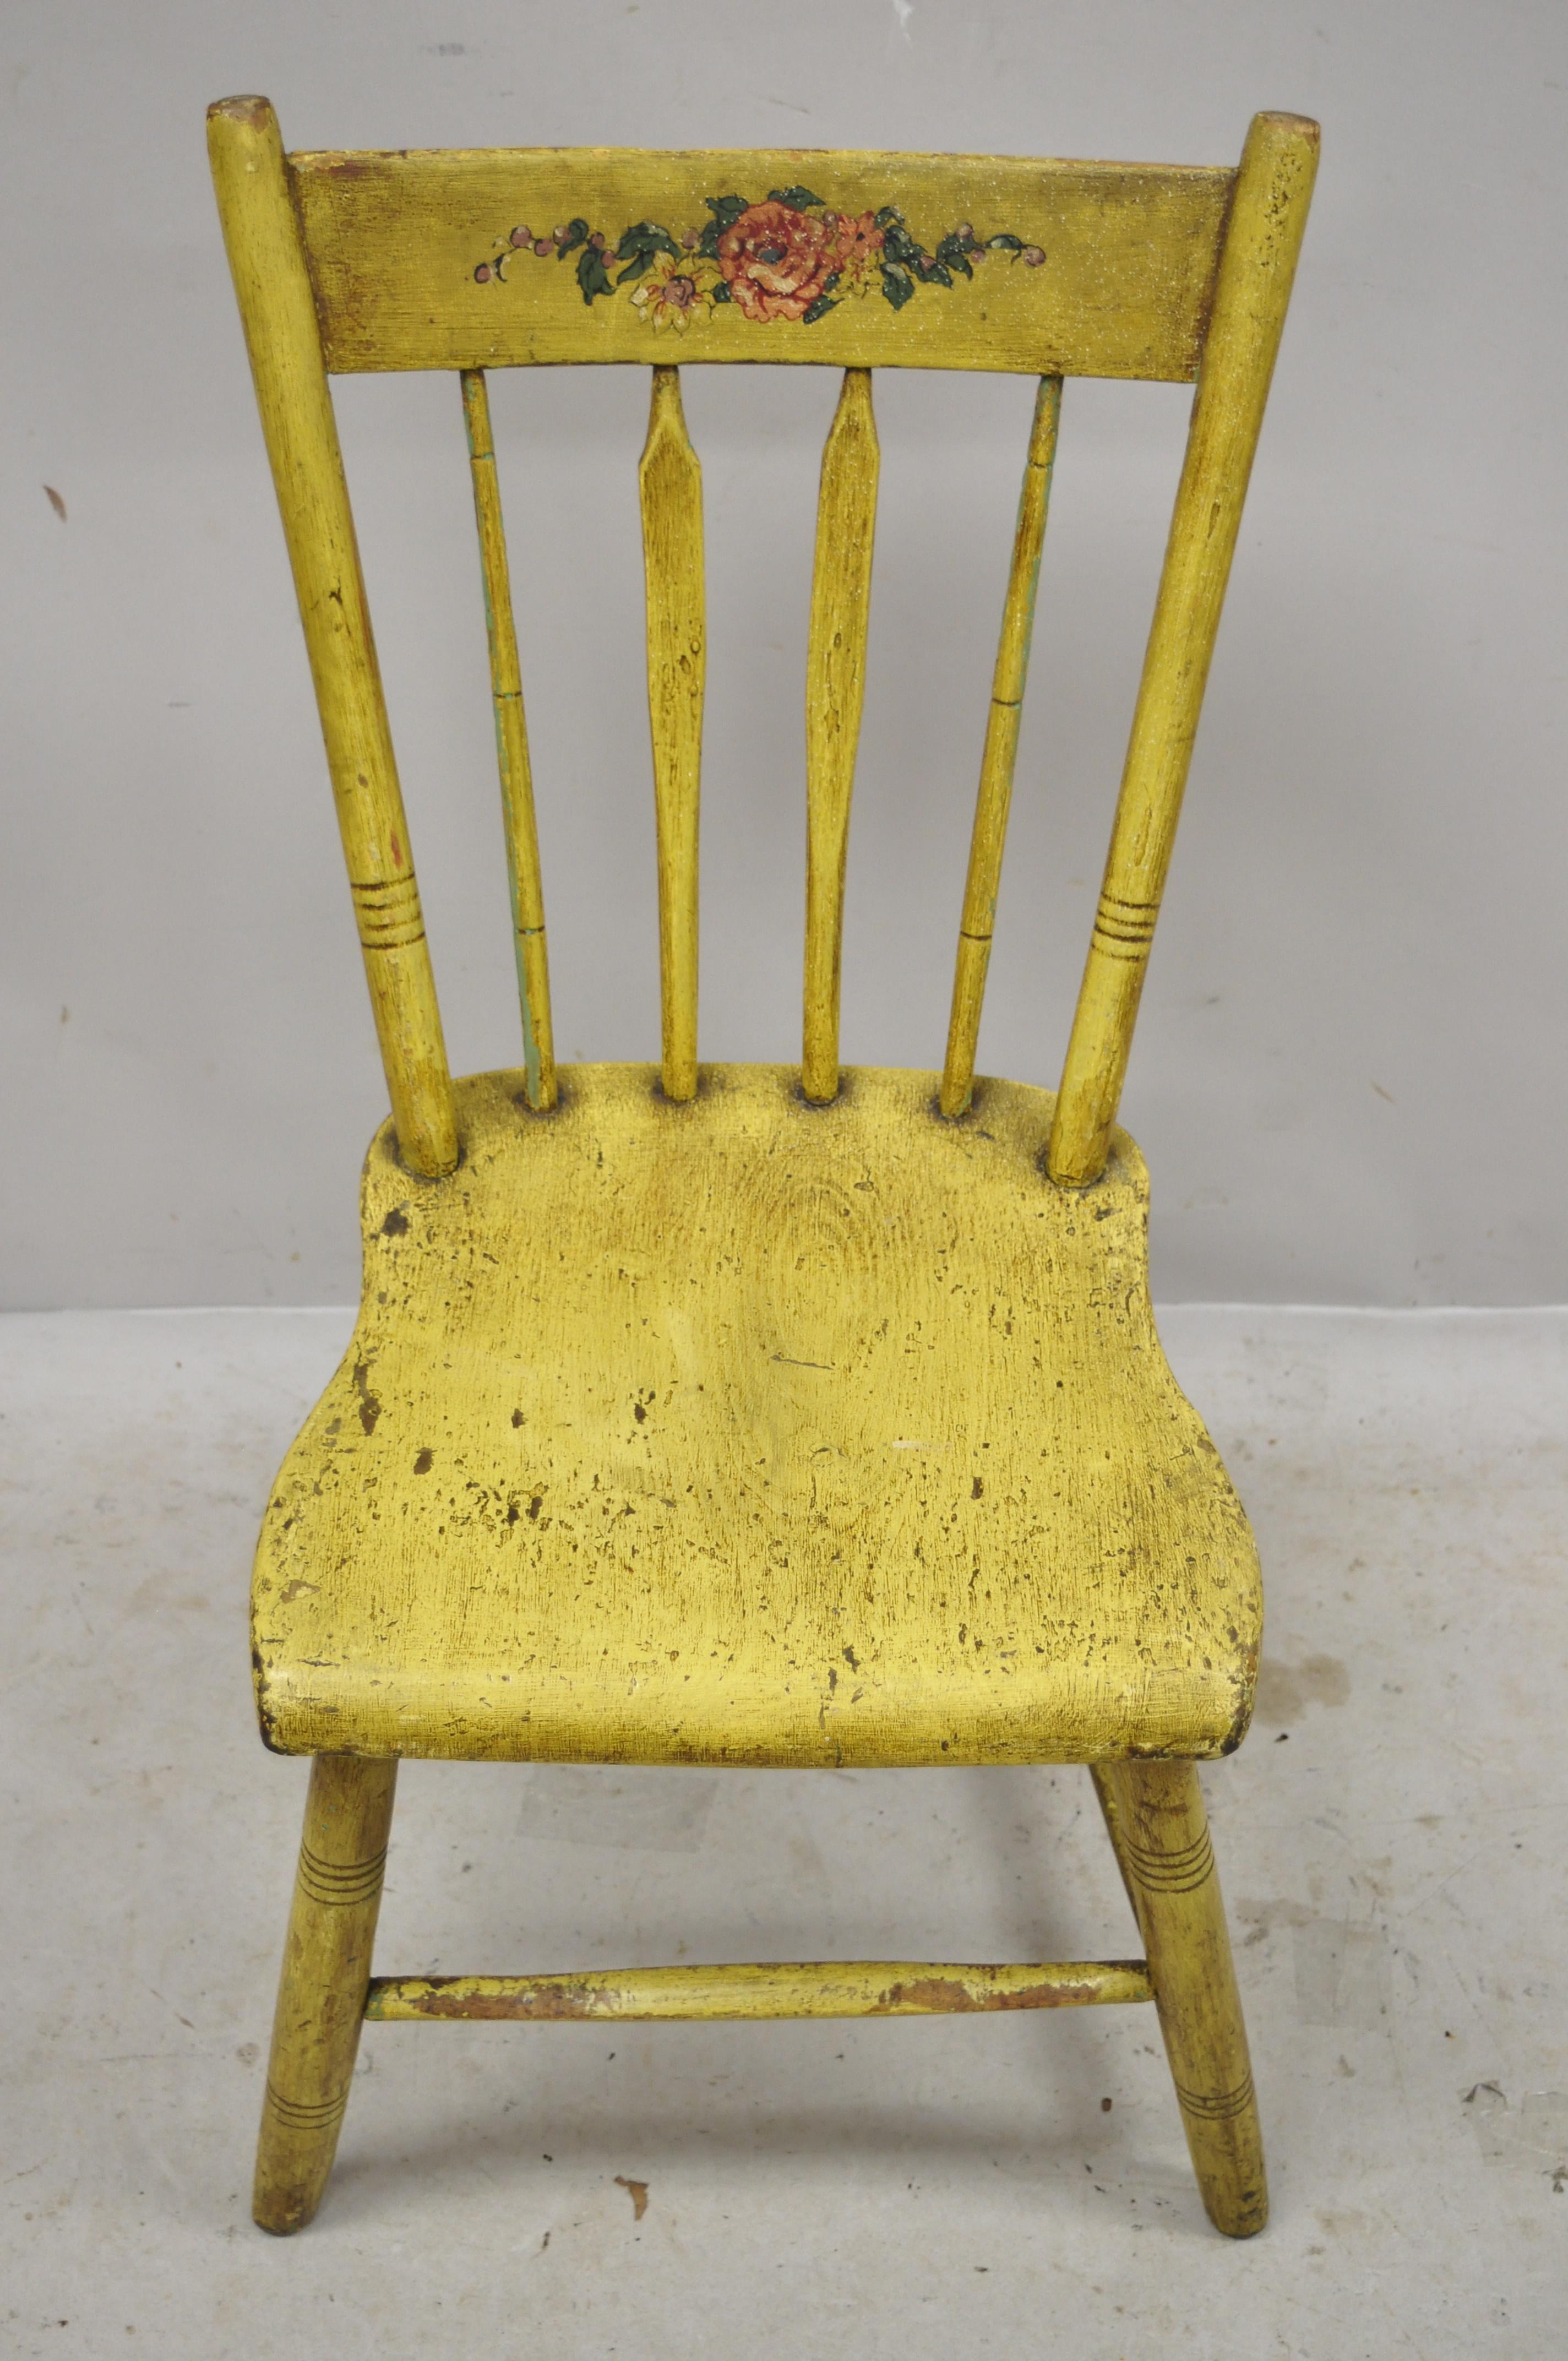 Frederick Loeser & Co Yellow American Primitive Hitchcock Painted Side Chair 'B' For Sale 4